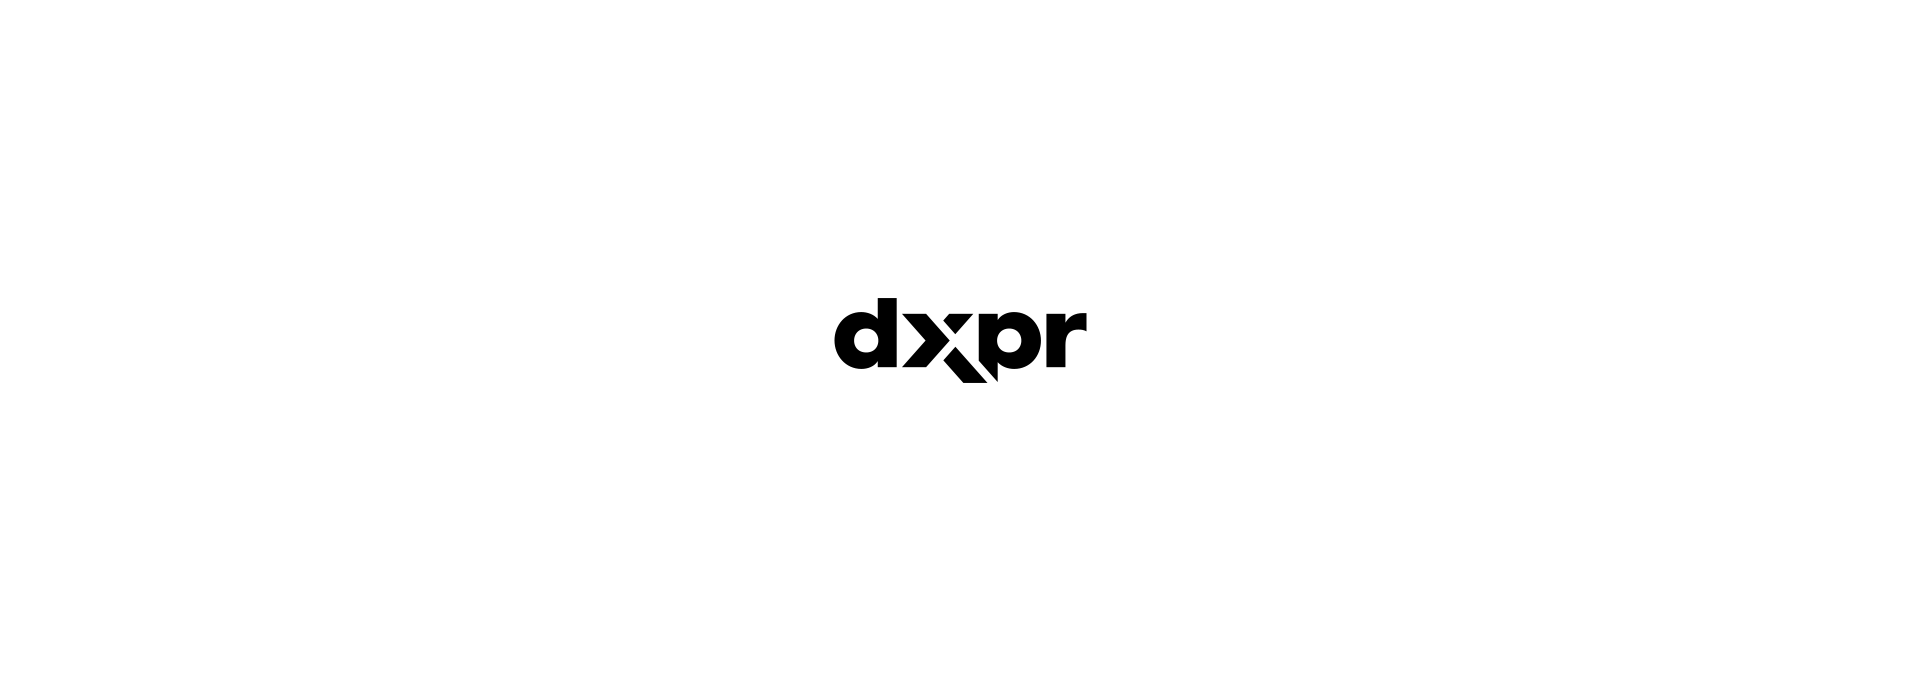 dxpr